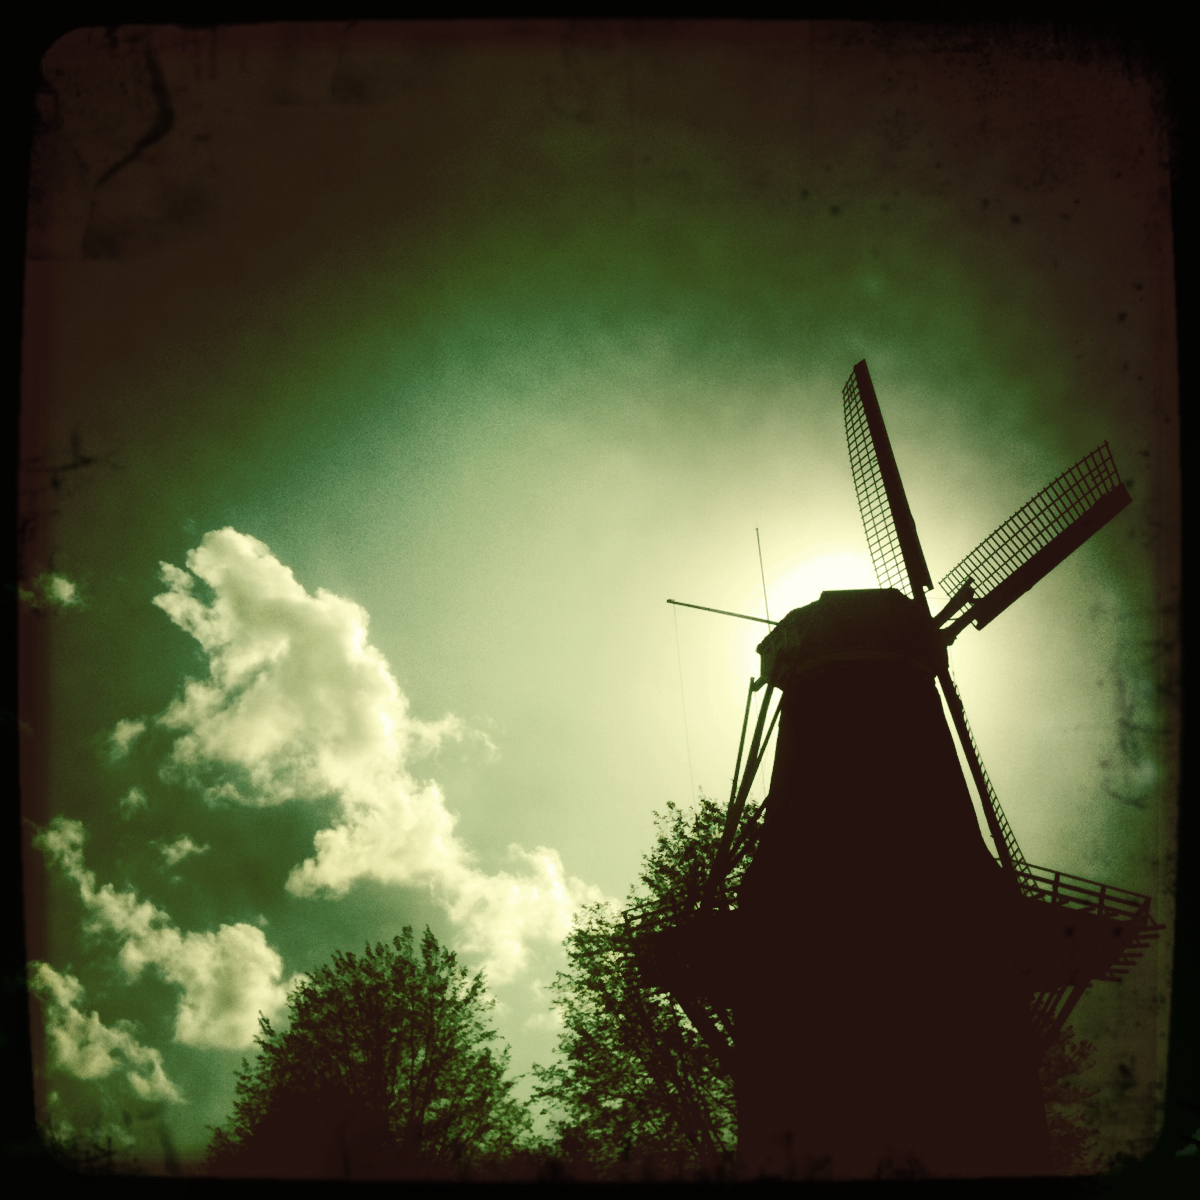 Proud windmill stands Dutch silhouette